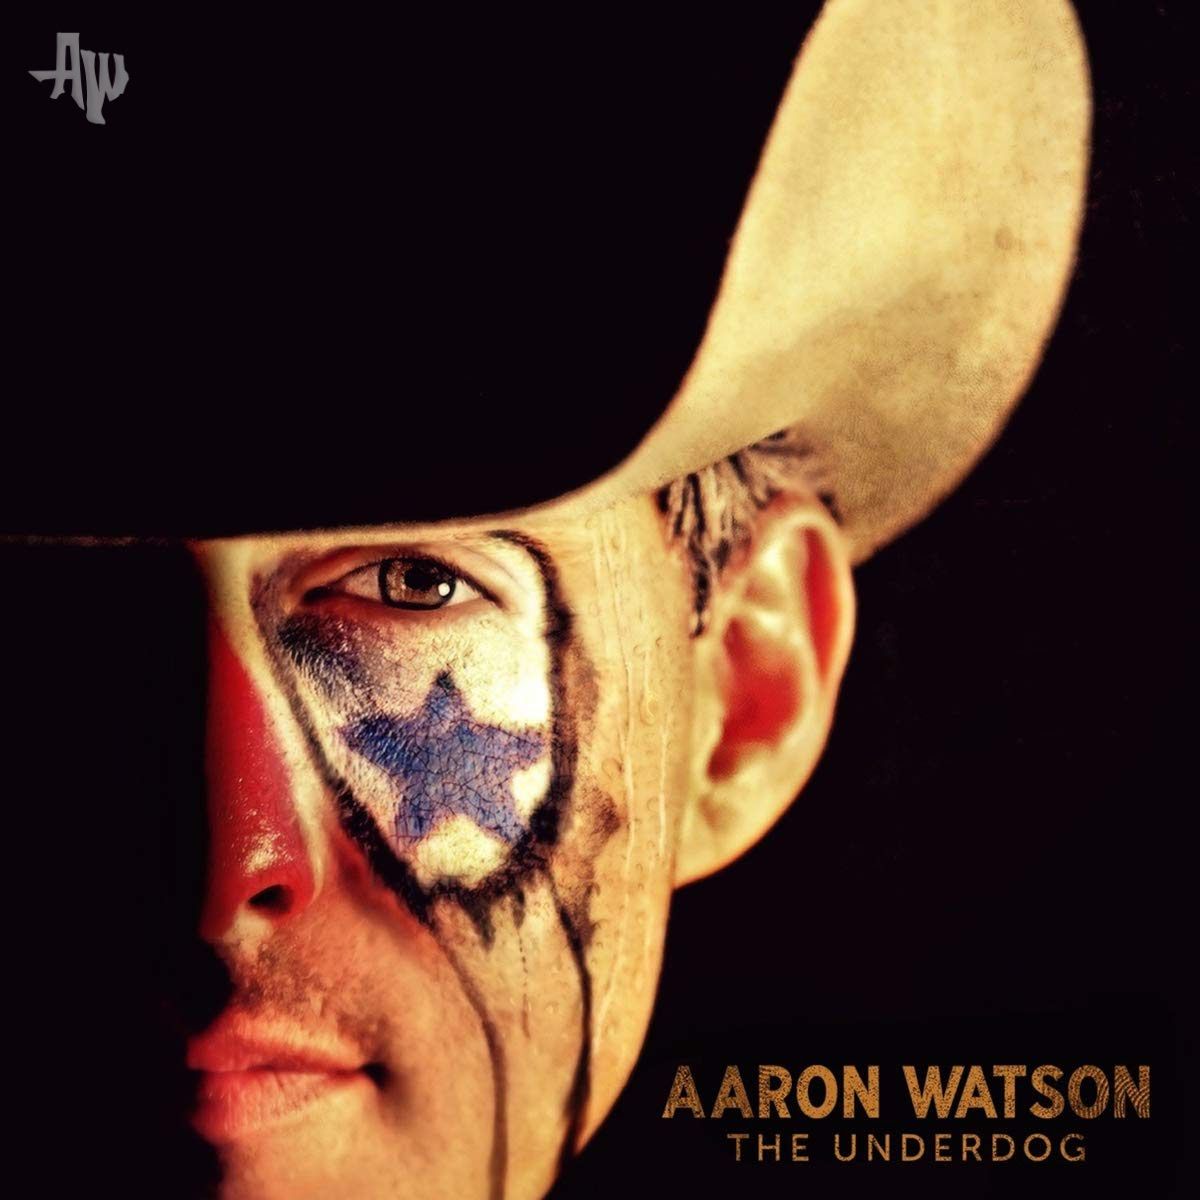 Each album cover for me is an opportunity to let my personality shine through. I enjoyed getting a shoutout for some of my covers from @gradywsmith recently. Which album cover of mine is your favorite? youtu.be/FejRKMtXhNg #familyfirst #countrymusic #texasmusic